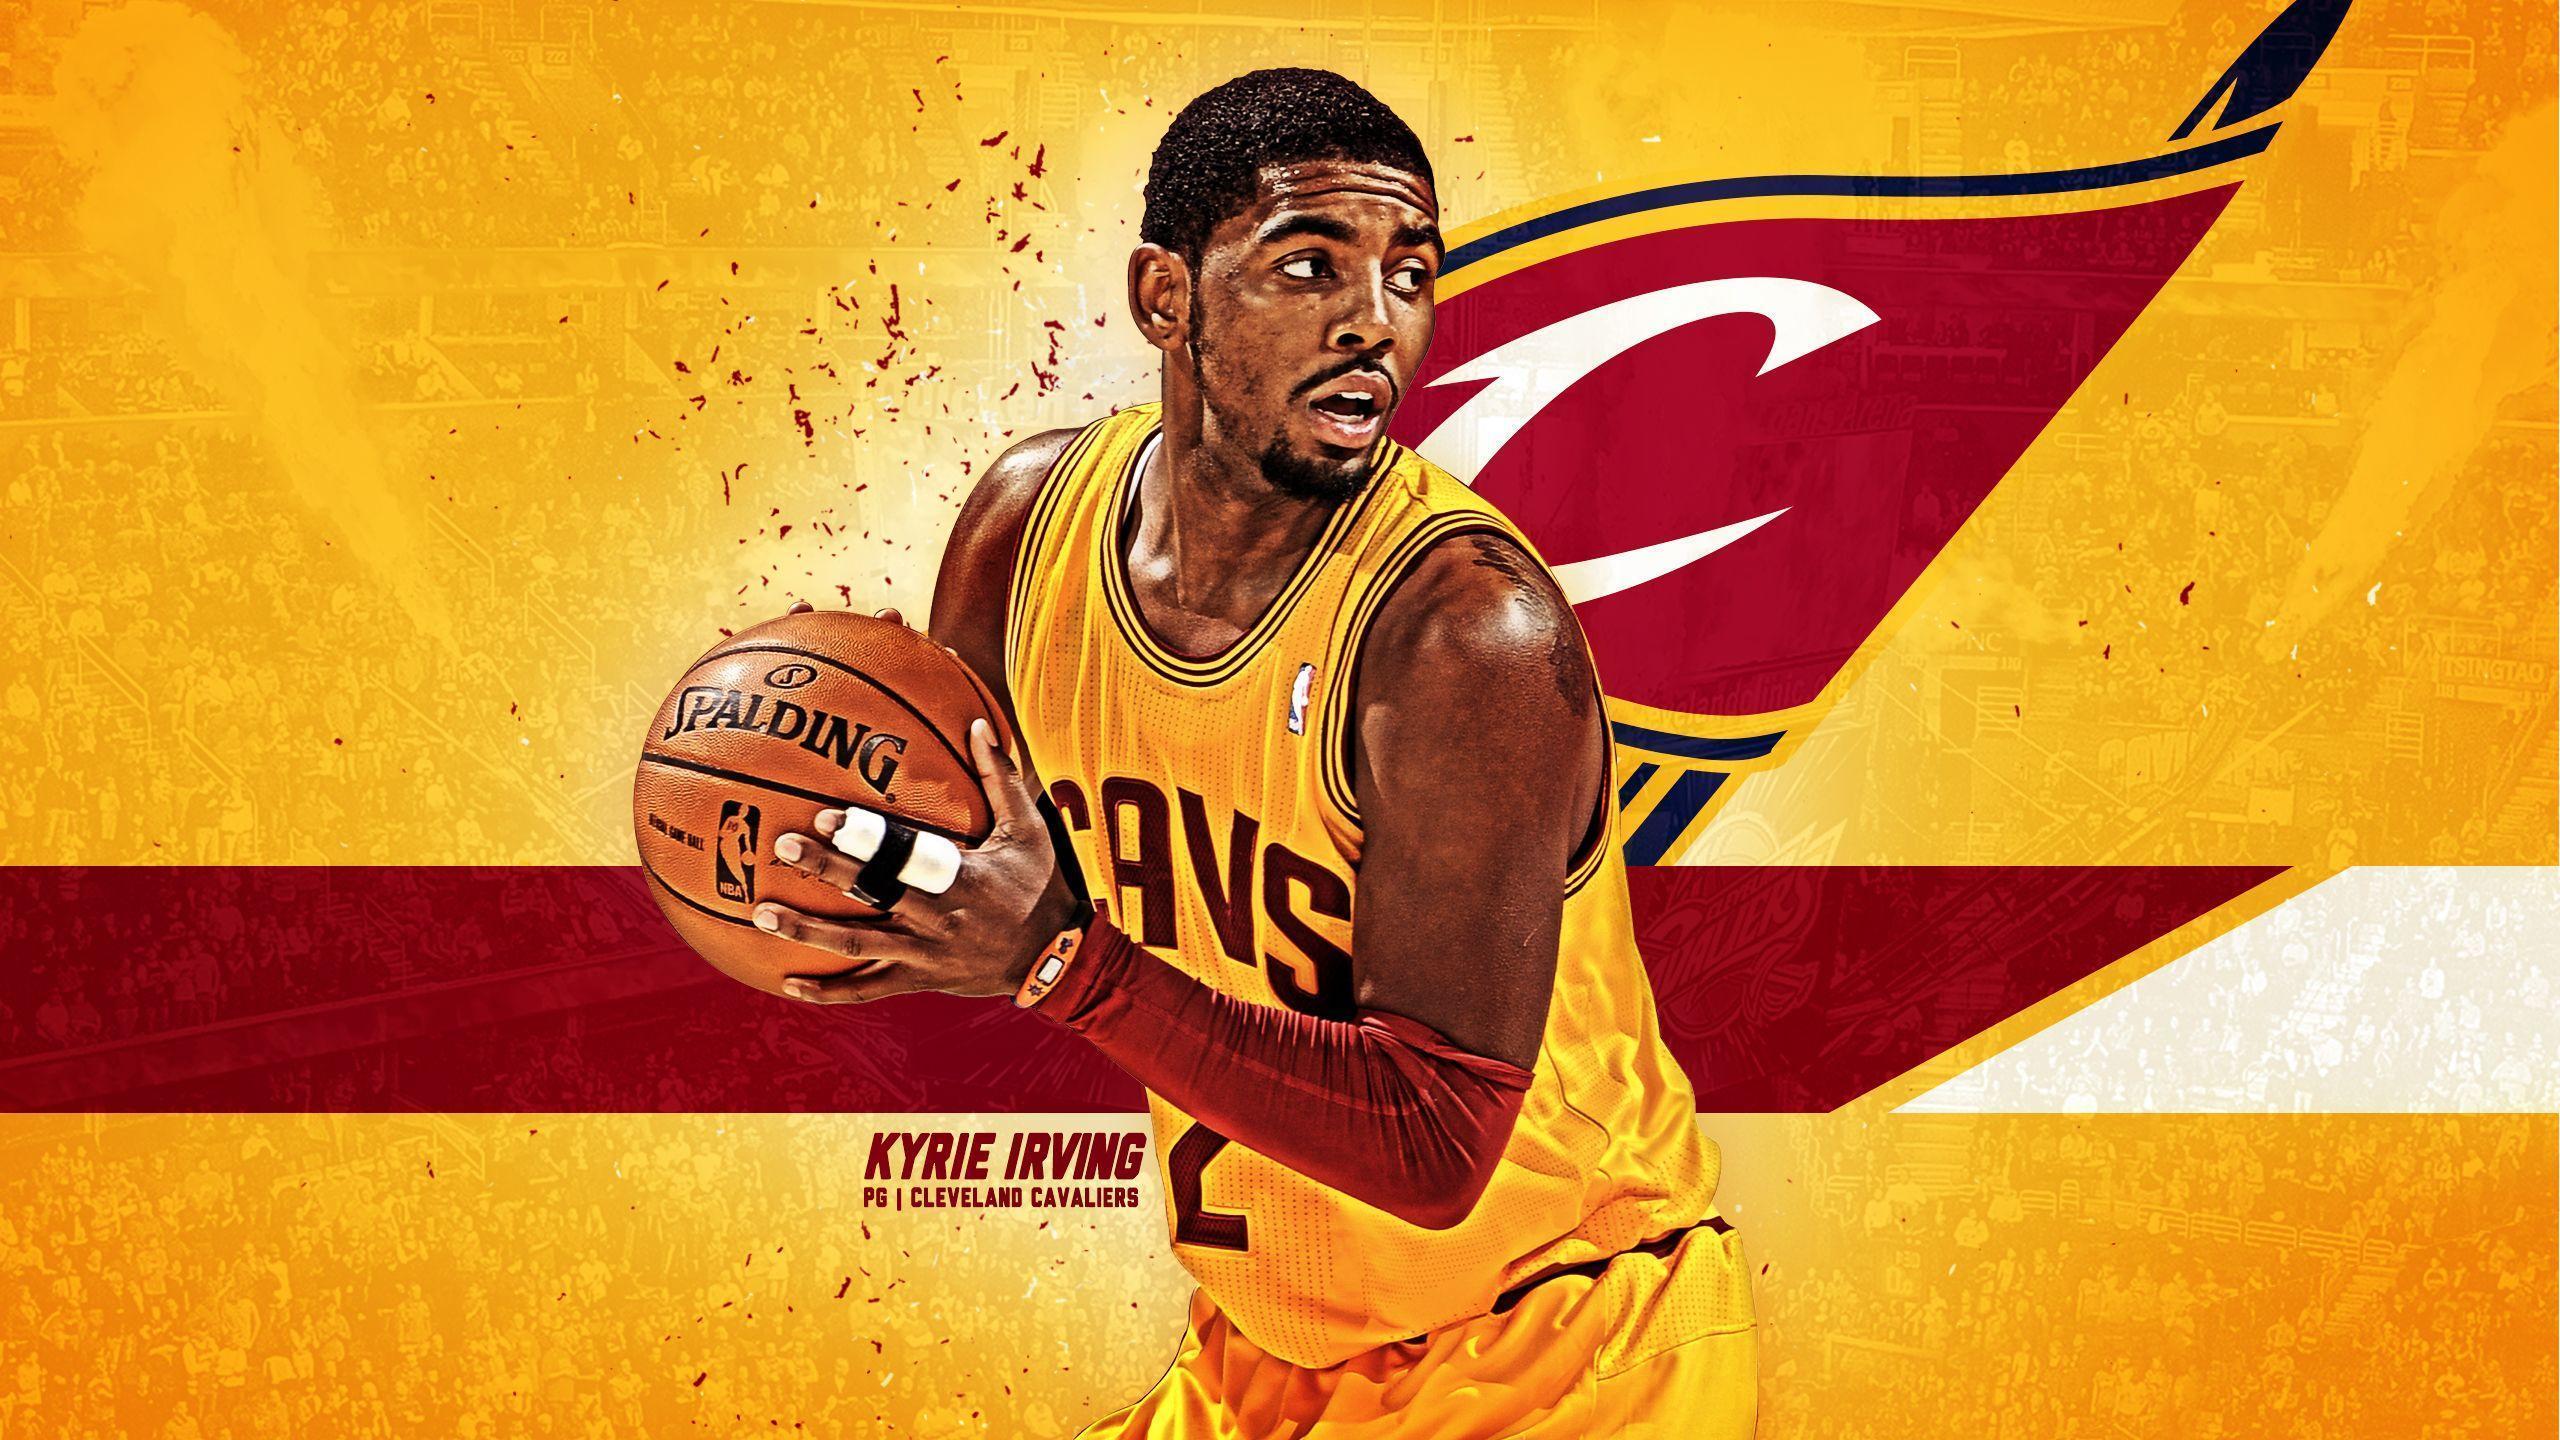 Wallpaper Cleveland Cavaliers 1920×1080 Cleveland Cavaliers